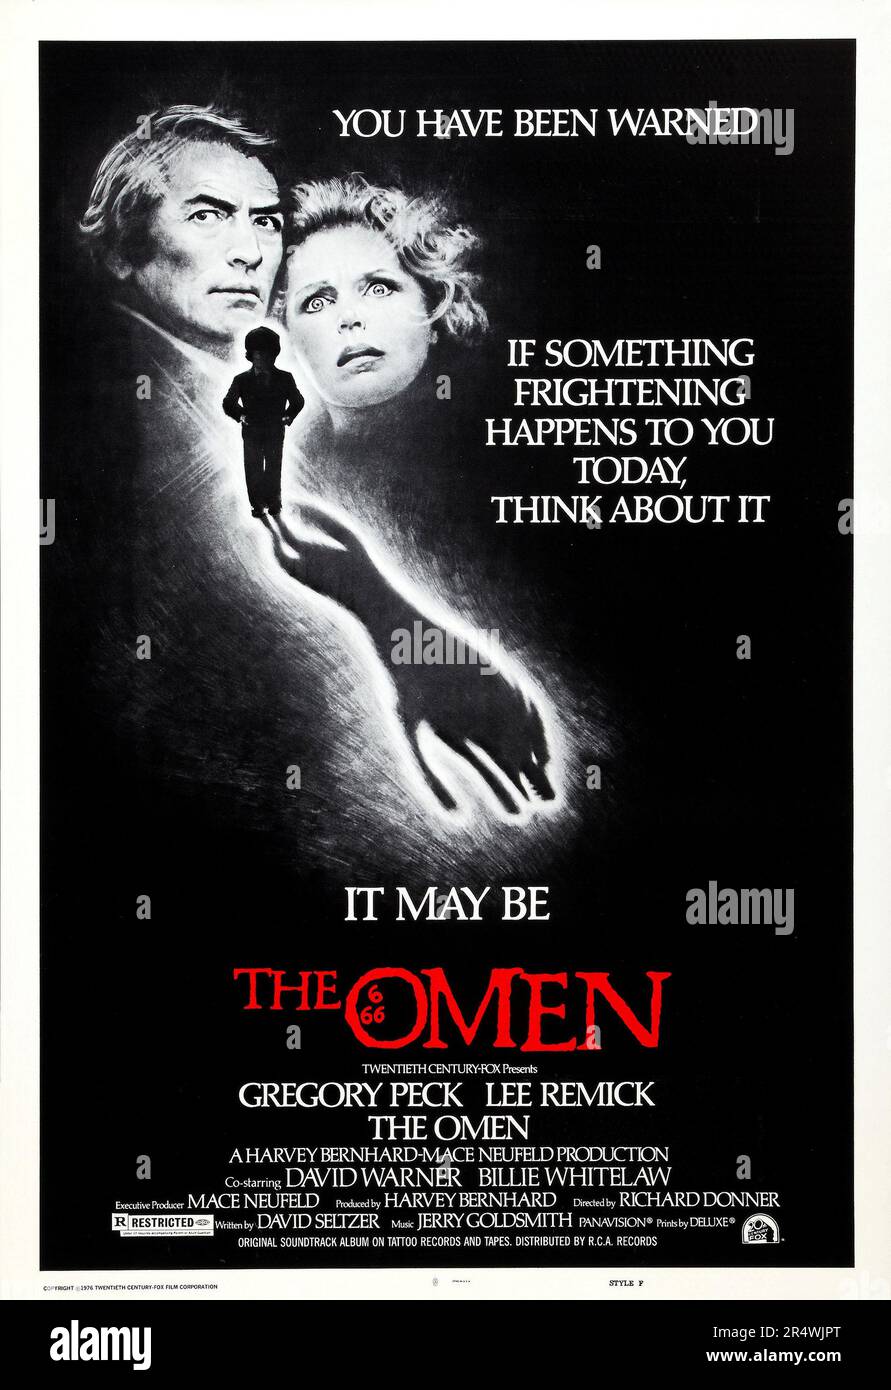 The Omen is an 1976 British/American suspense horror film directed by Richard Donner. The film stars Gregory Peck, Lee Remick and Leo McKern. It is the first film in The Omen series and was scripted by David Seltzer. Stock Photo